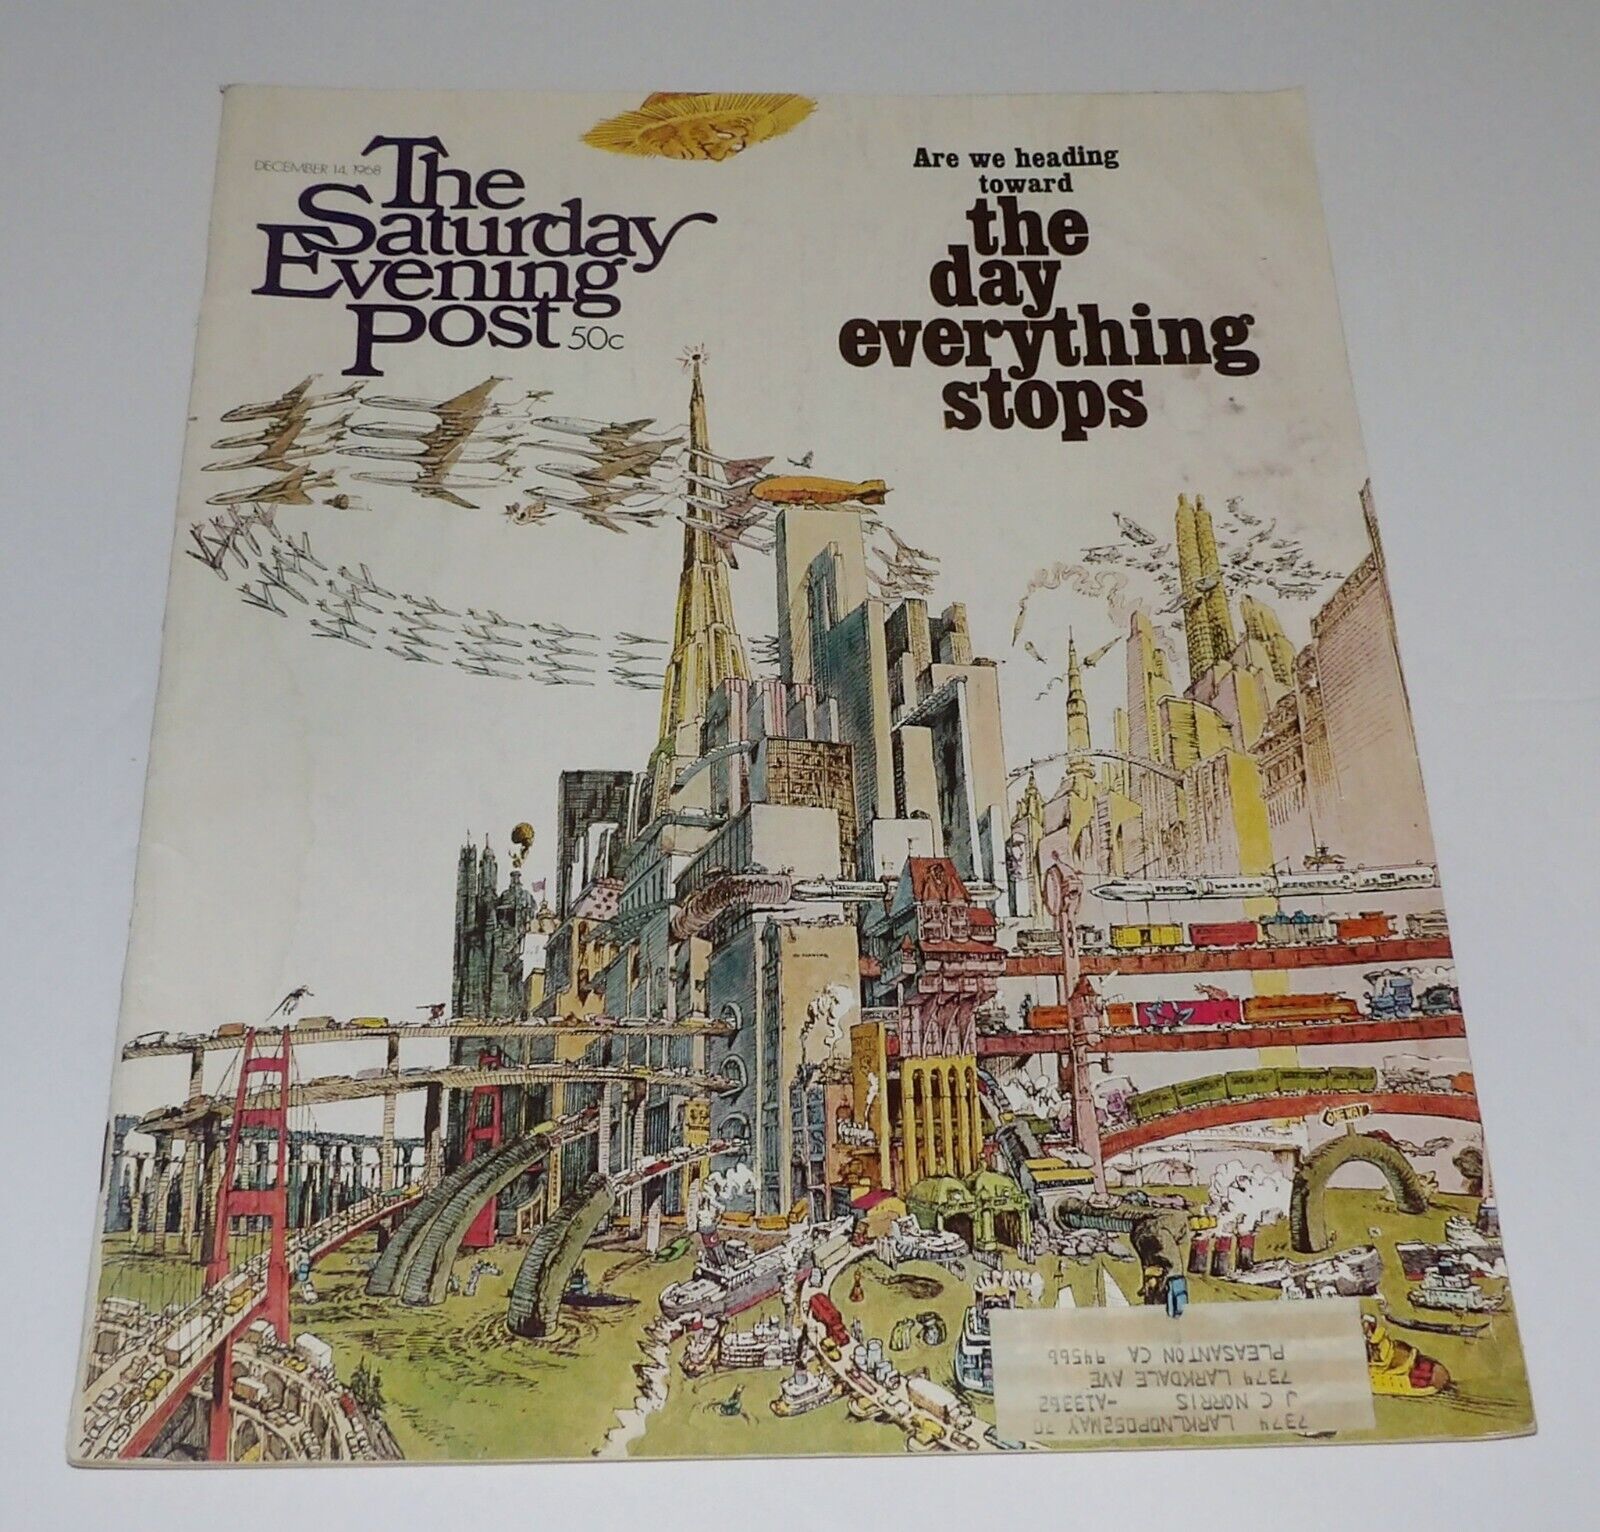 VINTAGE THE SATURDAY EVENING POST - DECEMBER 14 1968 - THE DAY EVERYTHING STOPS